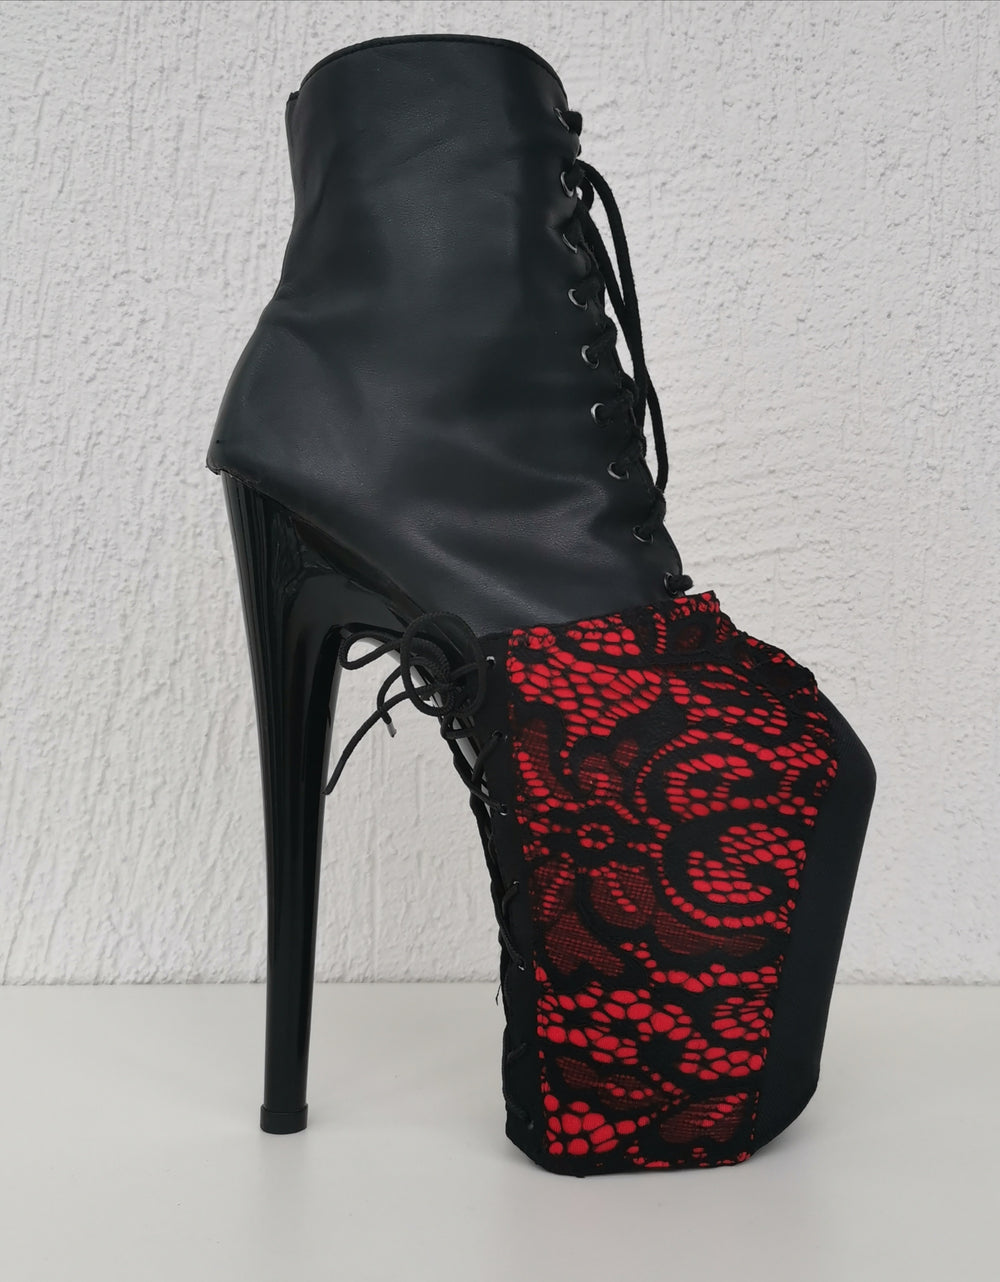 Z PLANET Platform Protectors - Lacey Red with Laces